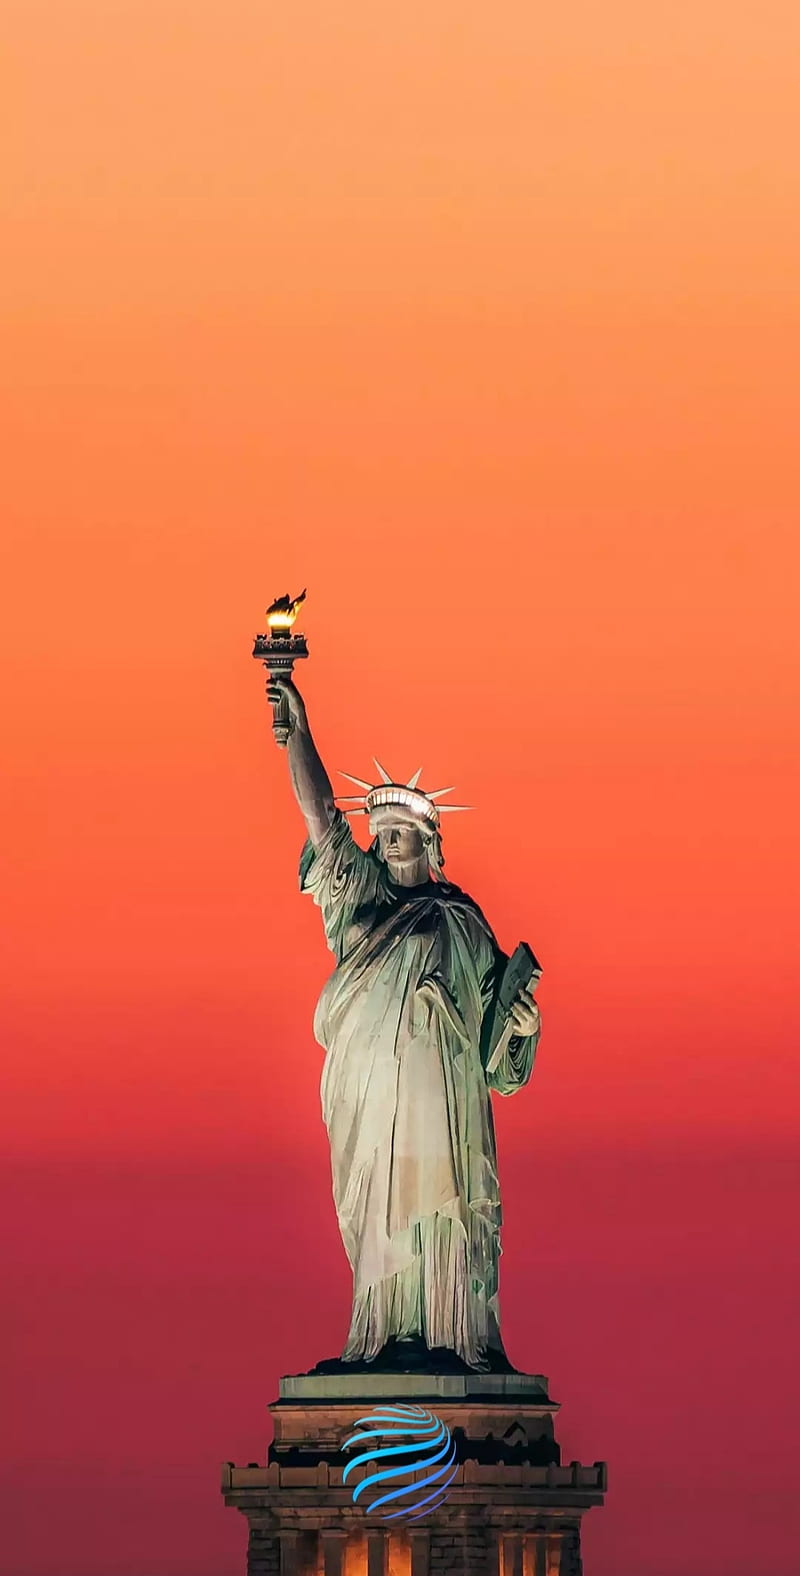 Statue of Liberty Wallpapers  Top 45 Best Statue of Liberty Backgrounds  Download